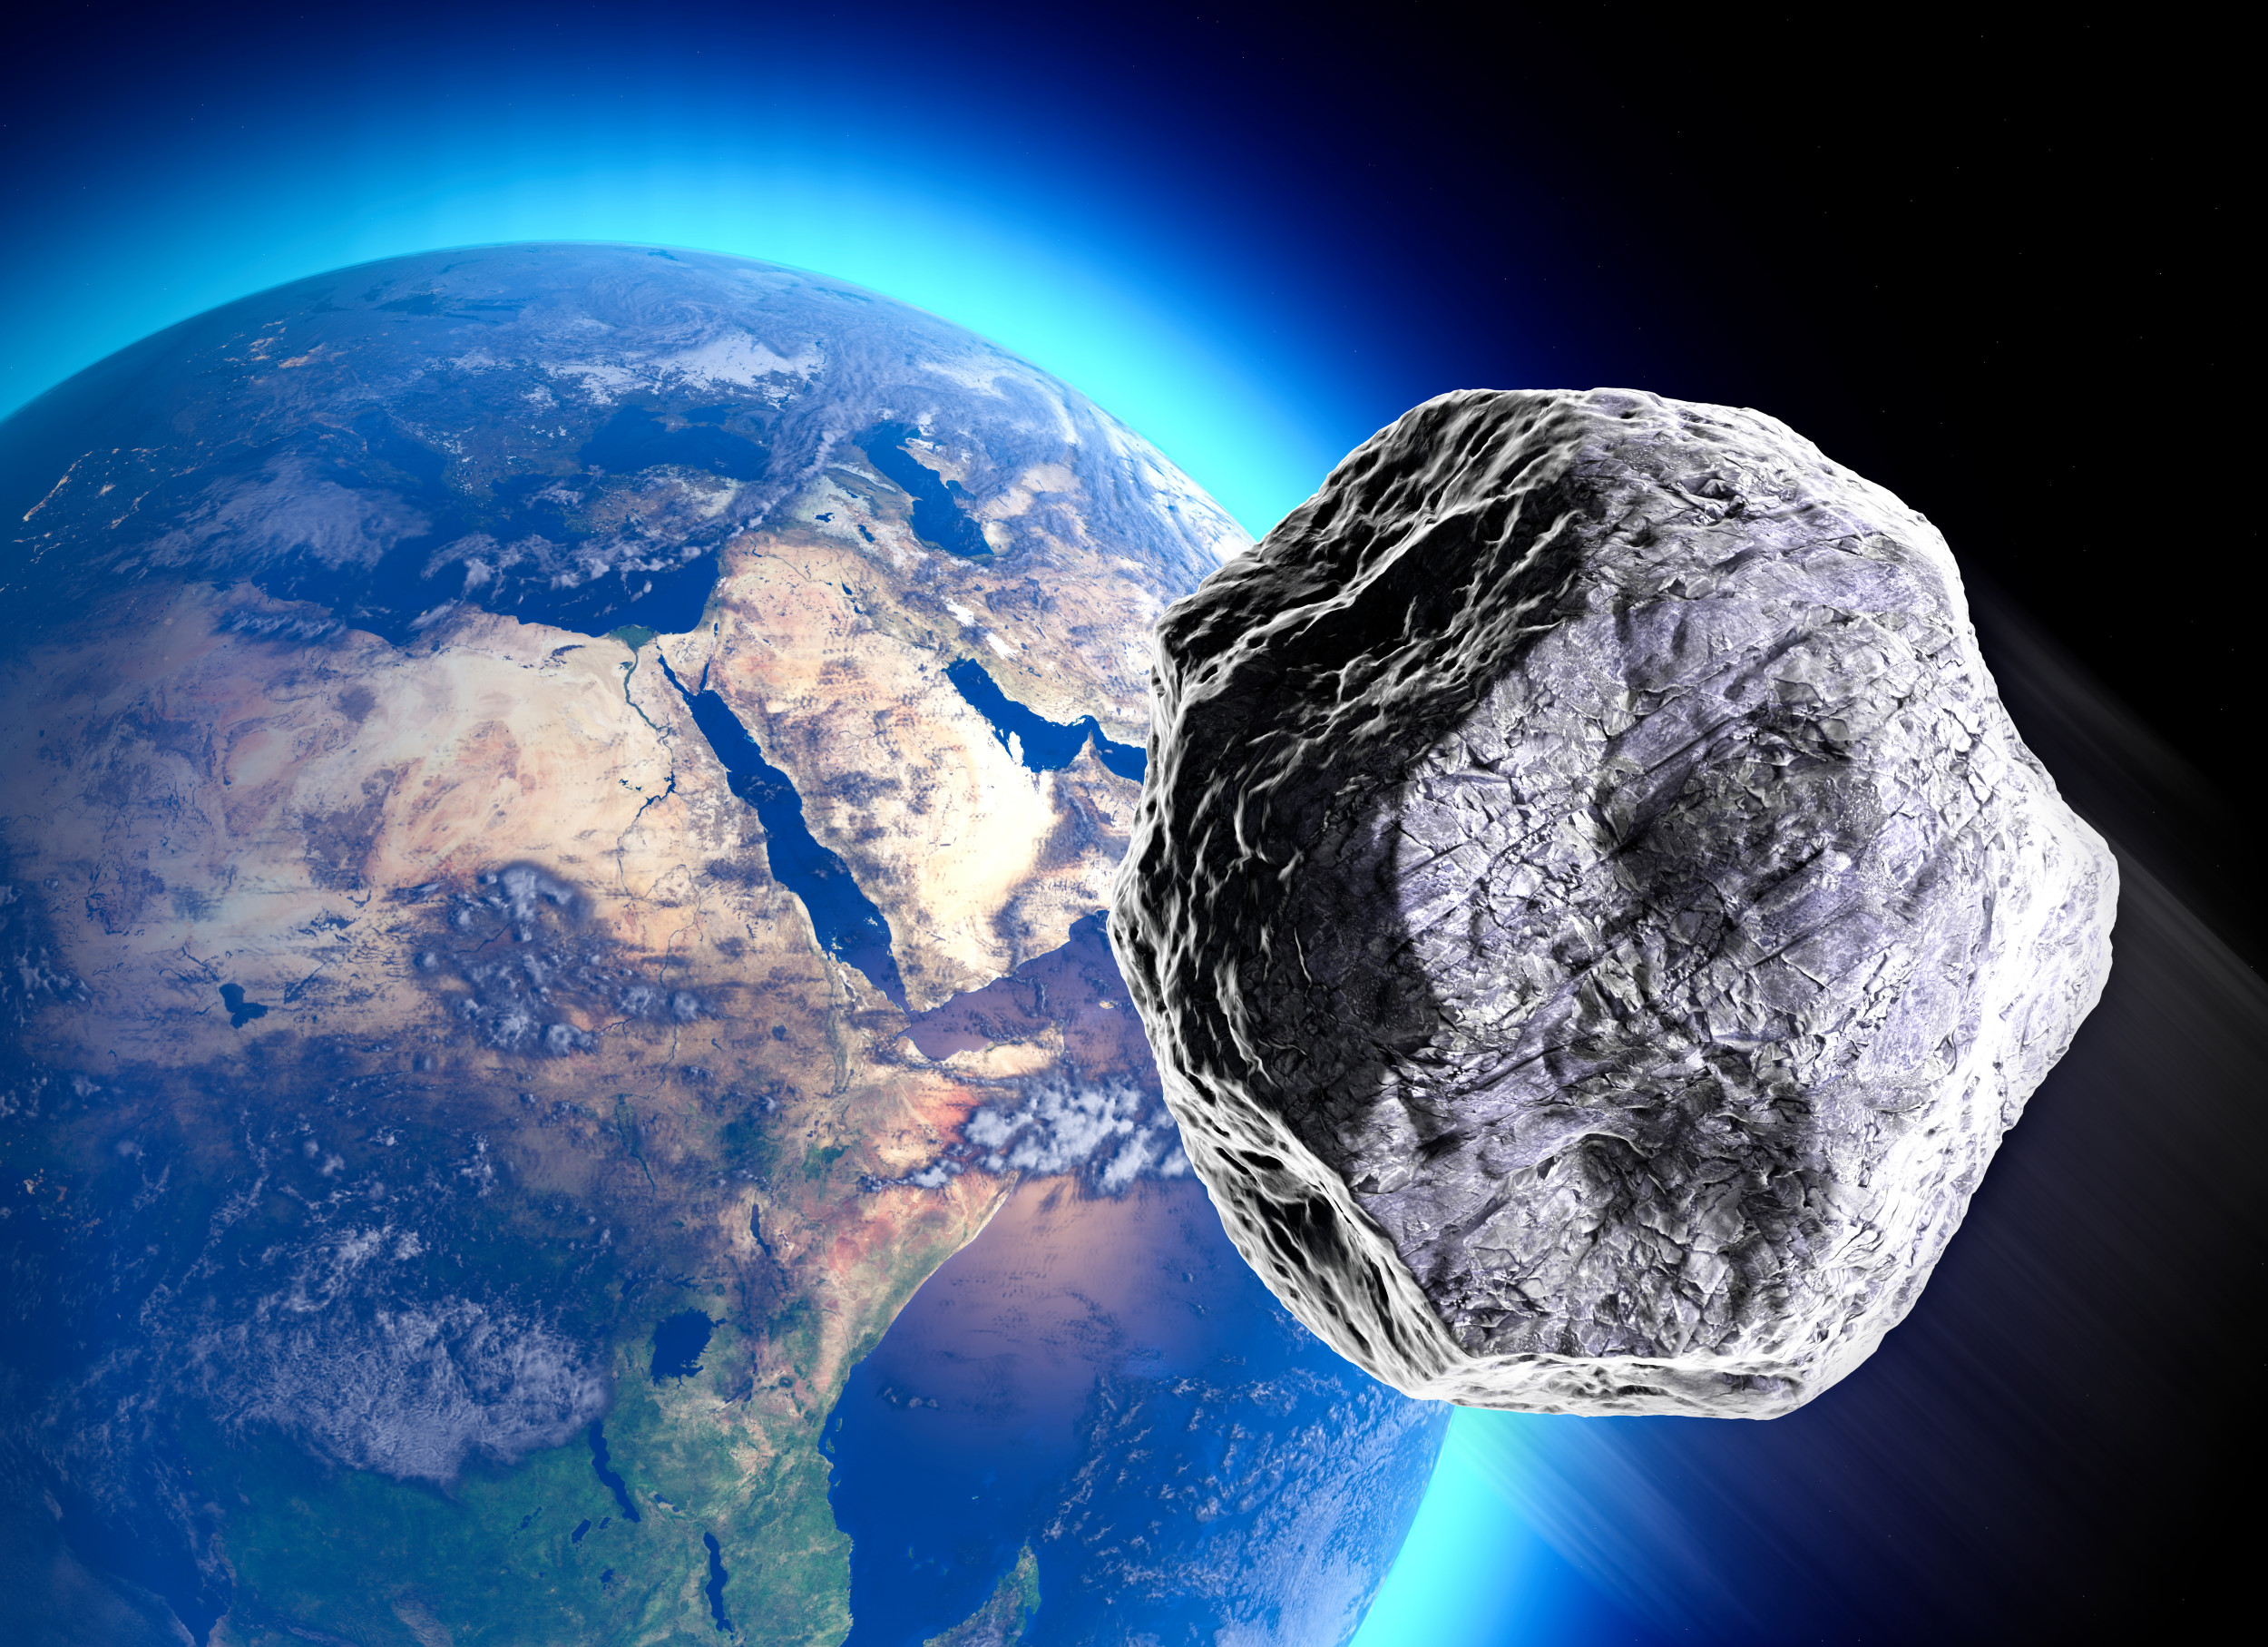 Video Shows 200Foot Asteroid Approaching Earth Before 'Very Close' Flyby